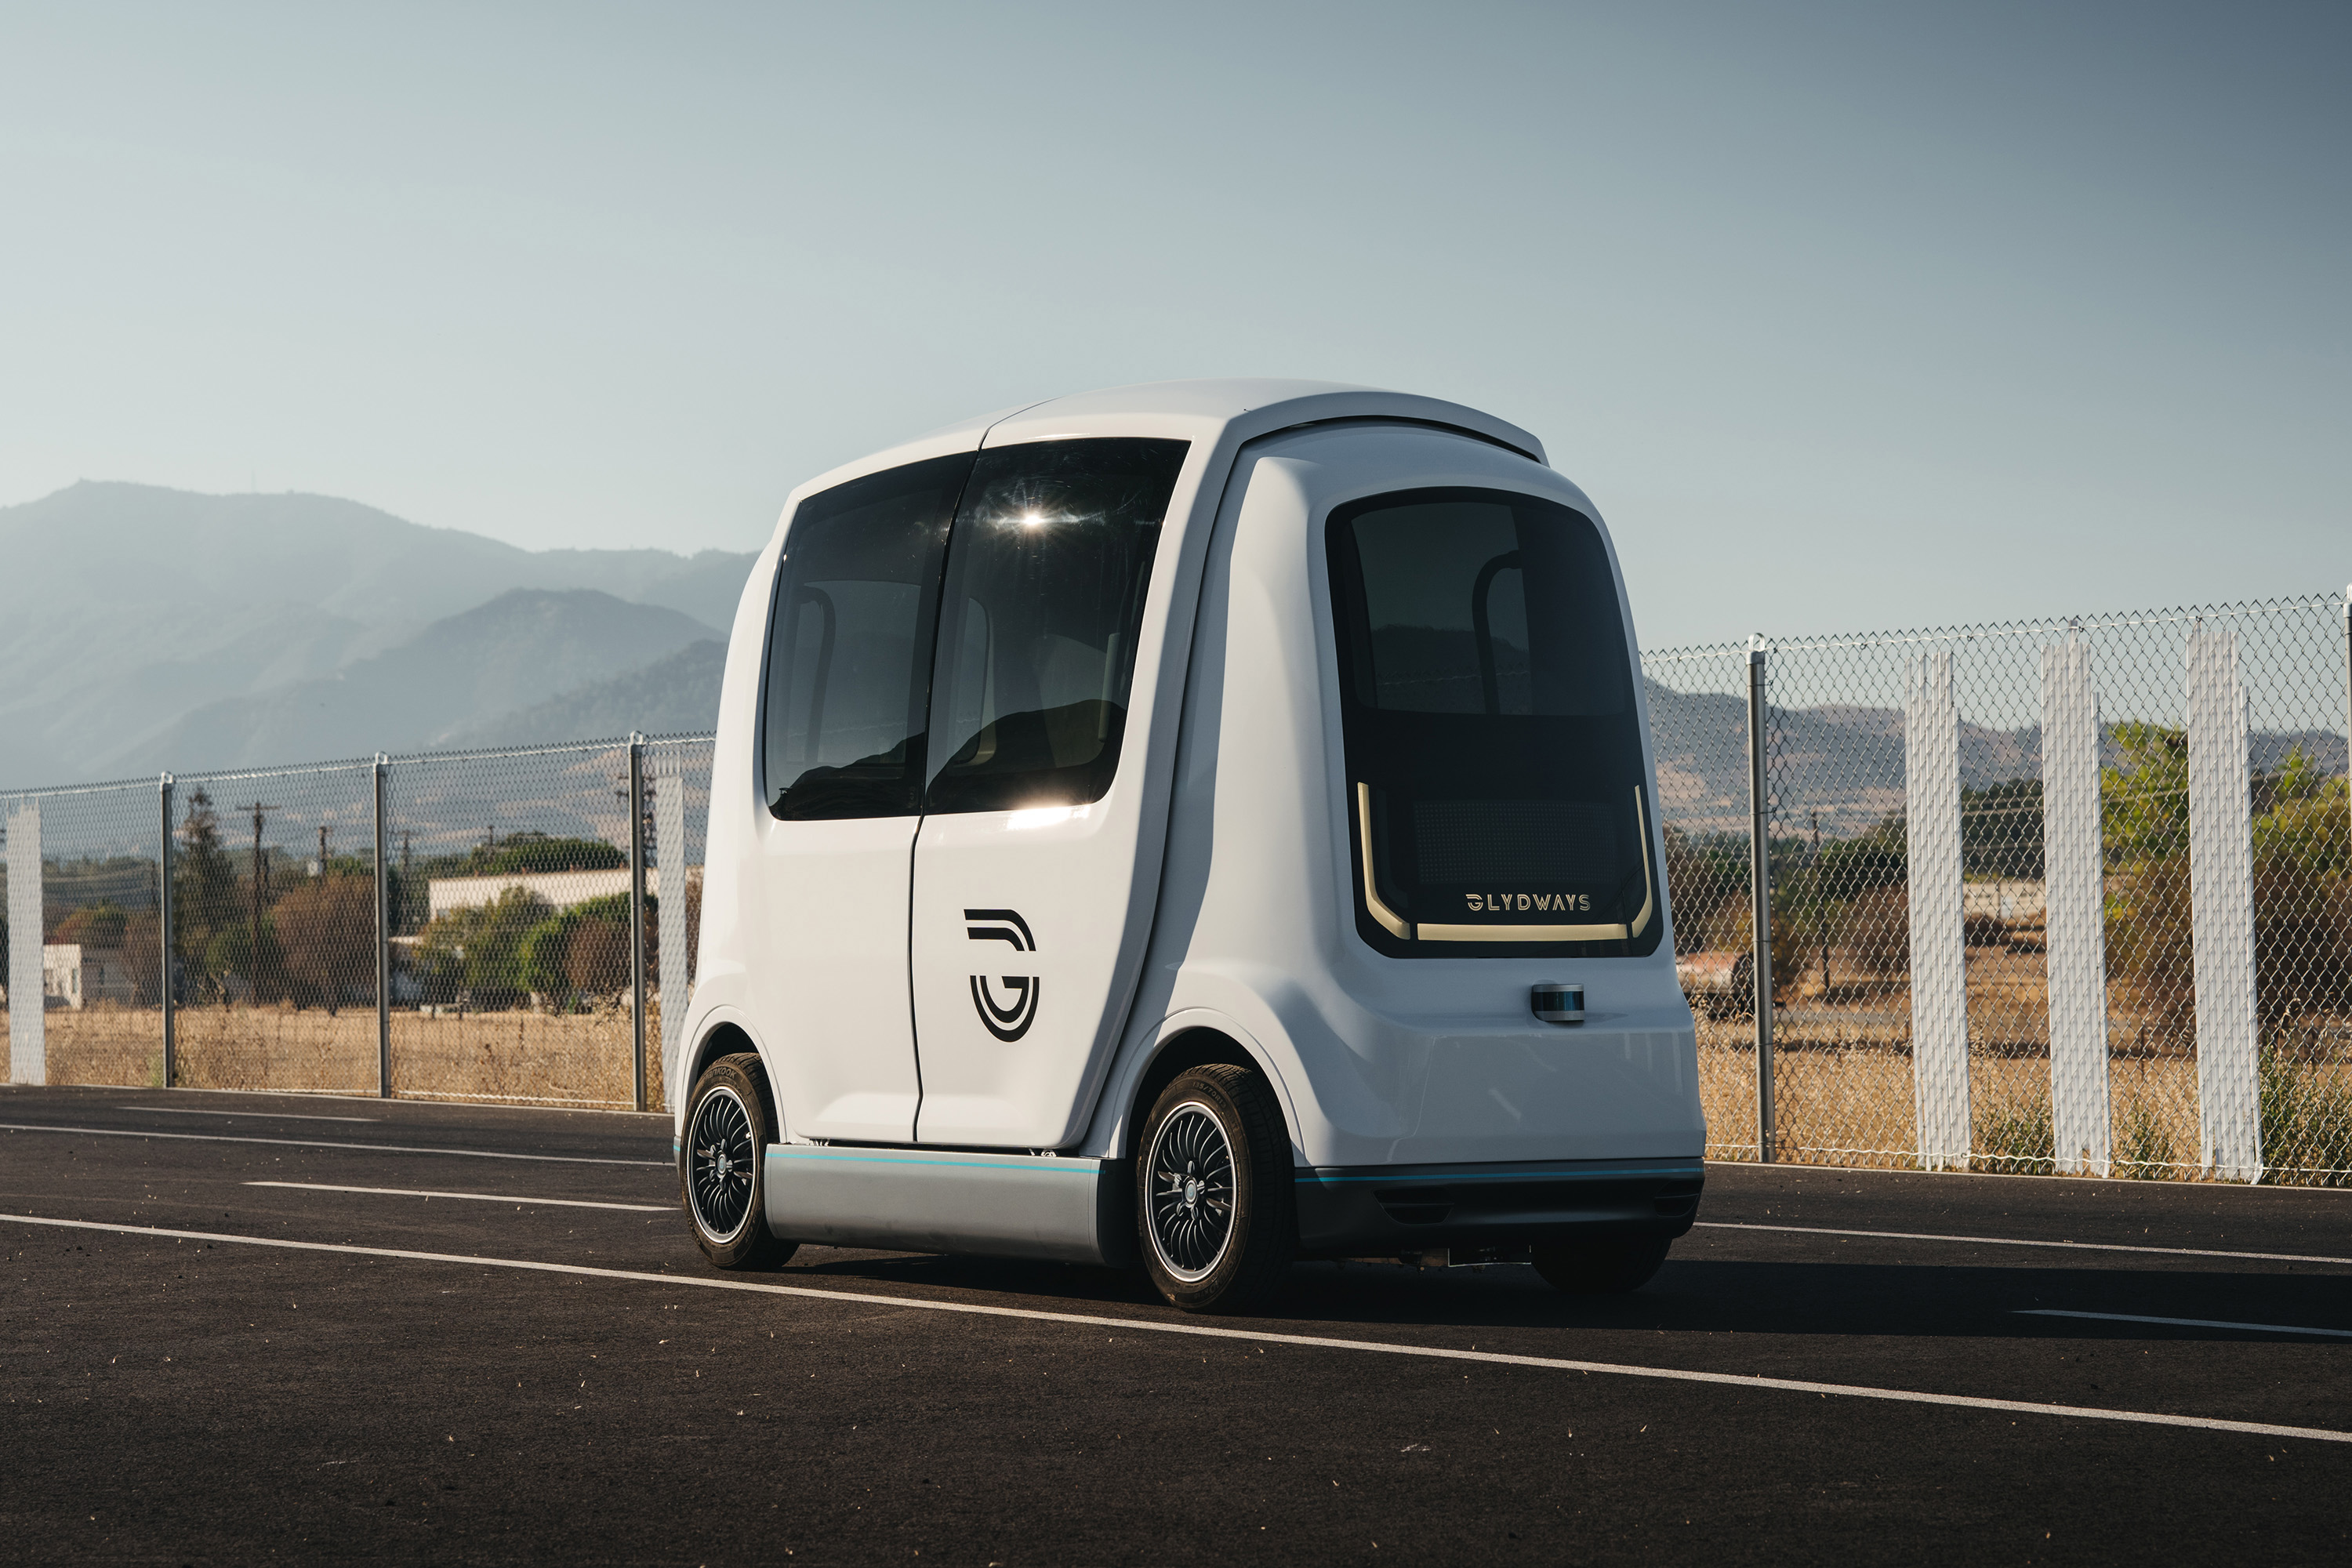 Glydcar is a personal vehicle designed for public transportation. Glydcars autonomously move in dedicated lanes, carrying up to 4 passengers directly to their destination with no stops and with space for item such as bikes and luggage. (Glydways via Bay City News)